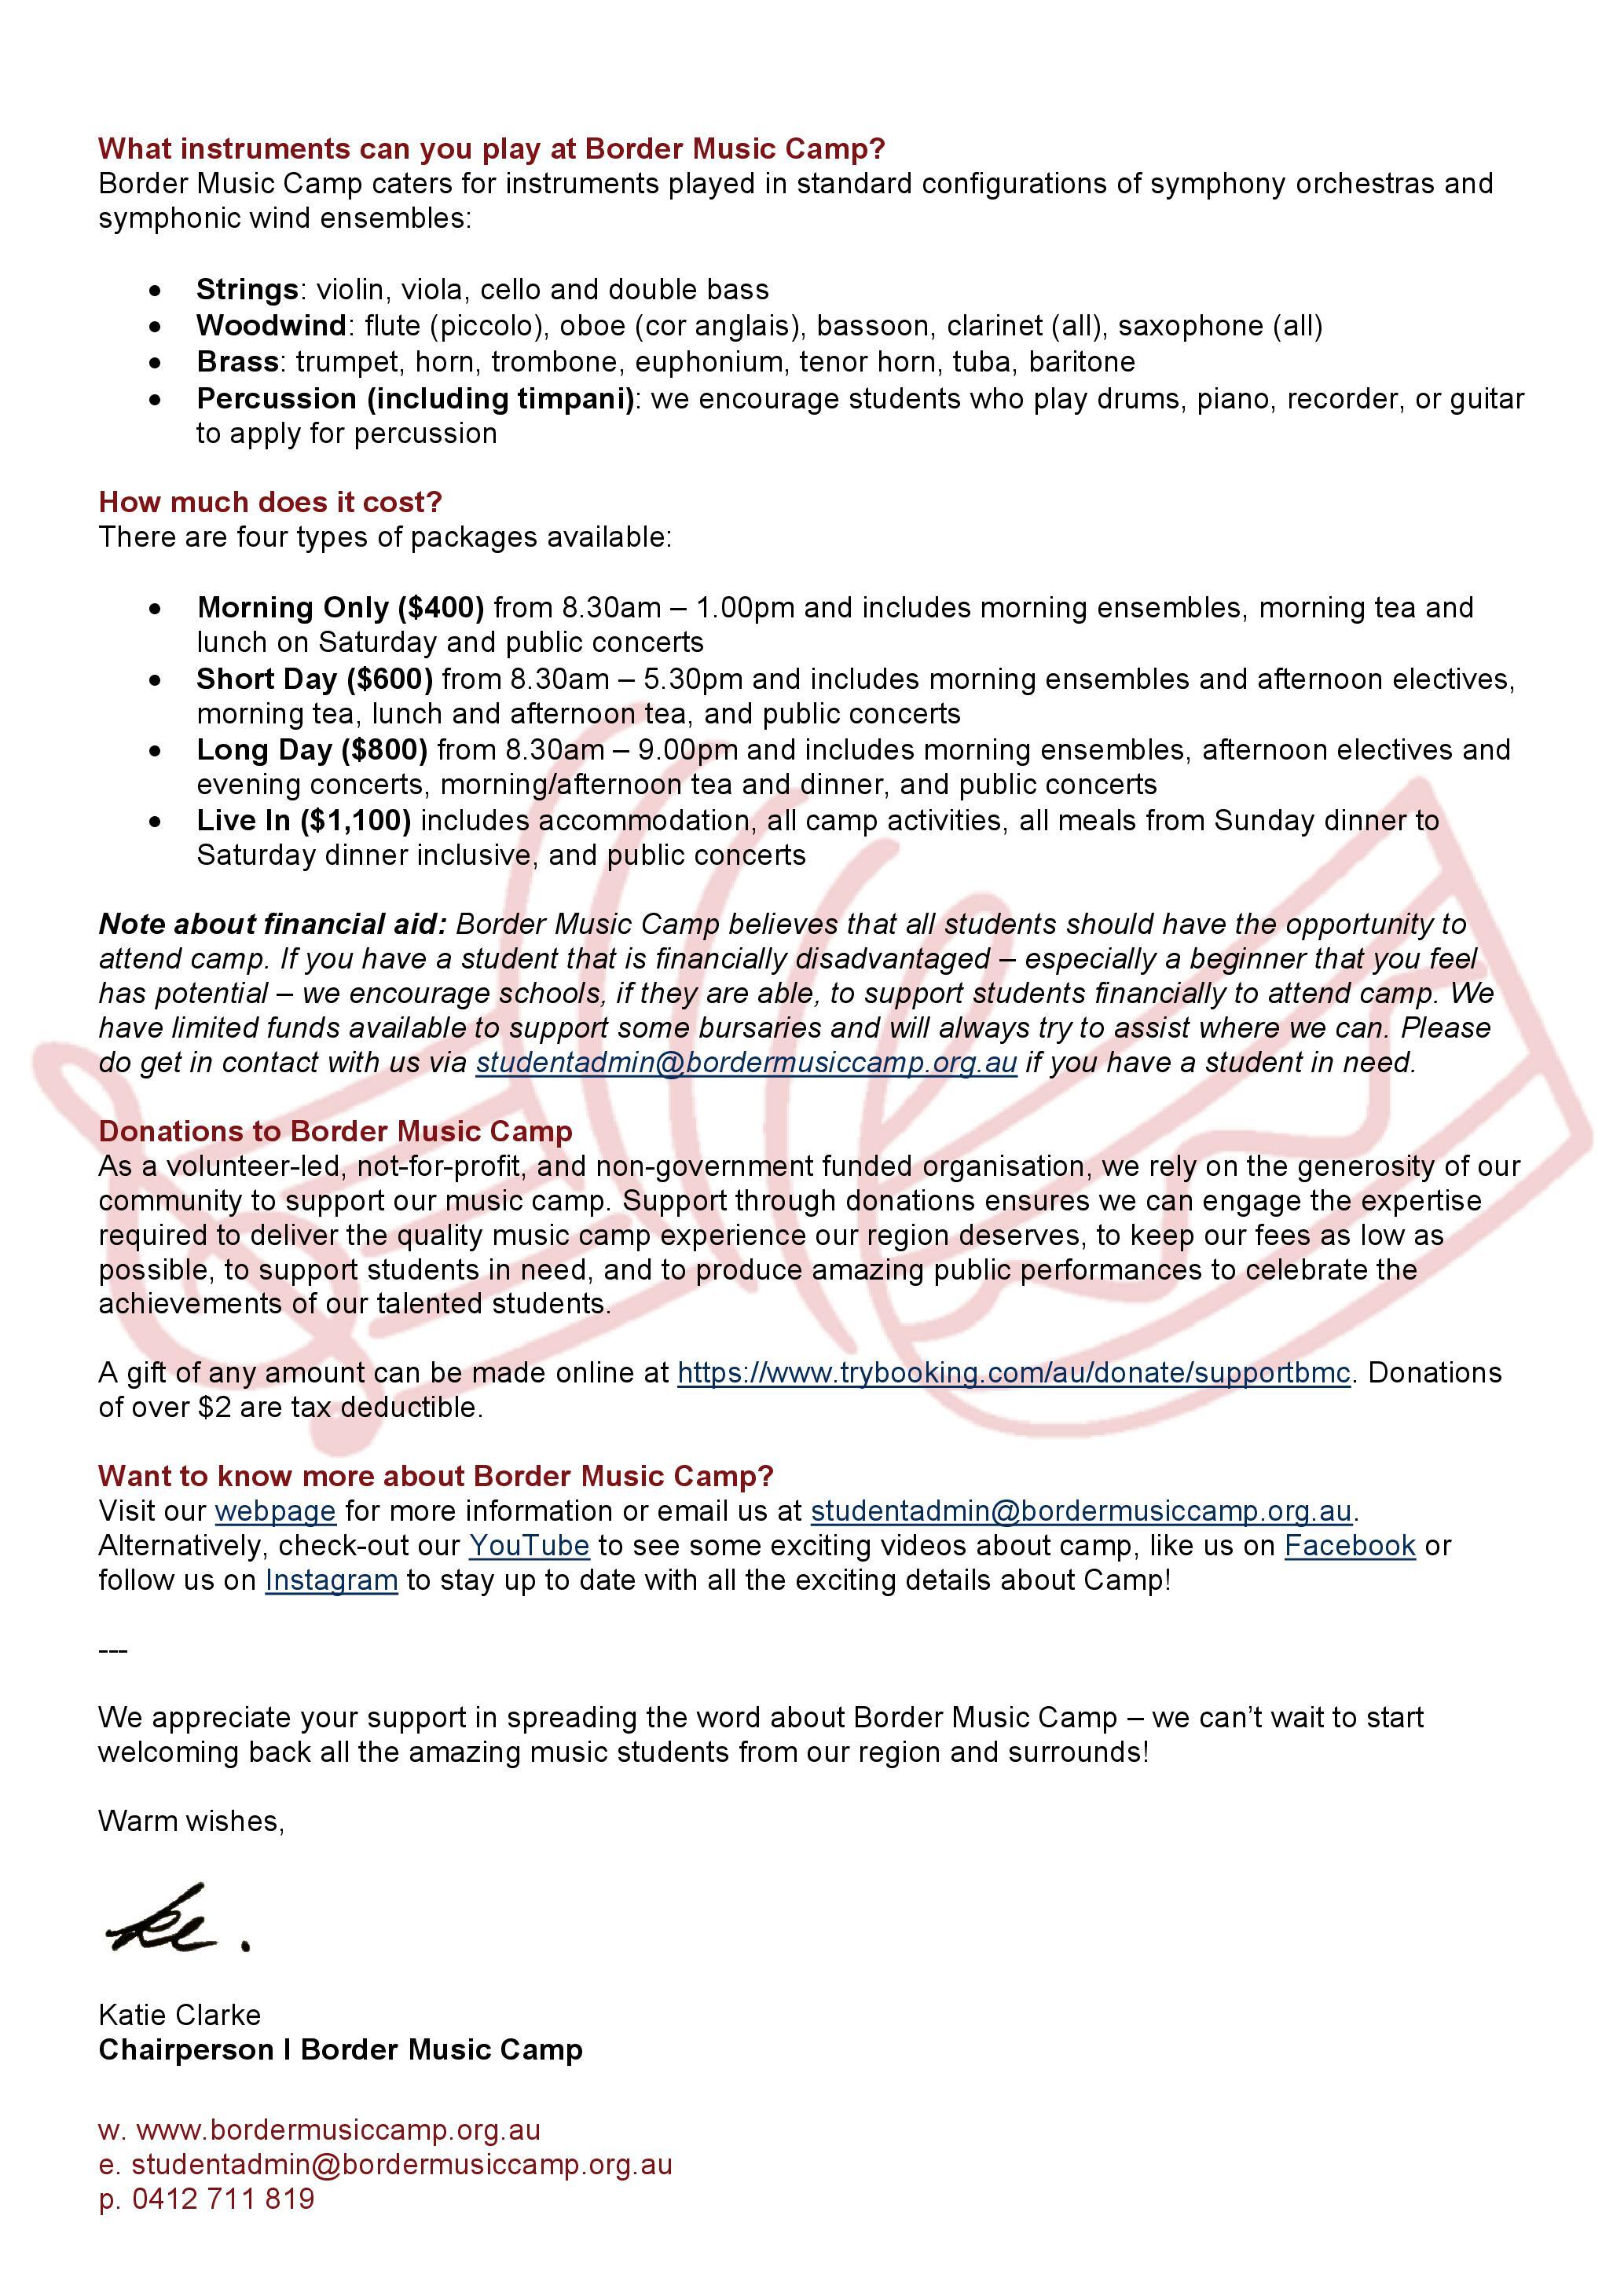 2022 Border Music Camp Promotion Letter_Page_2